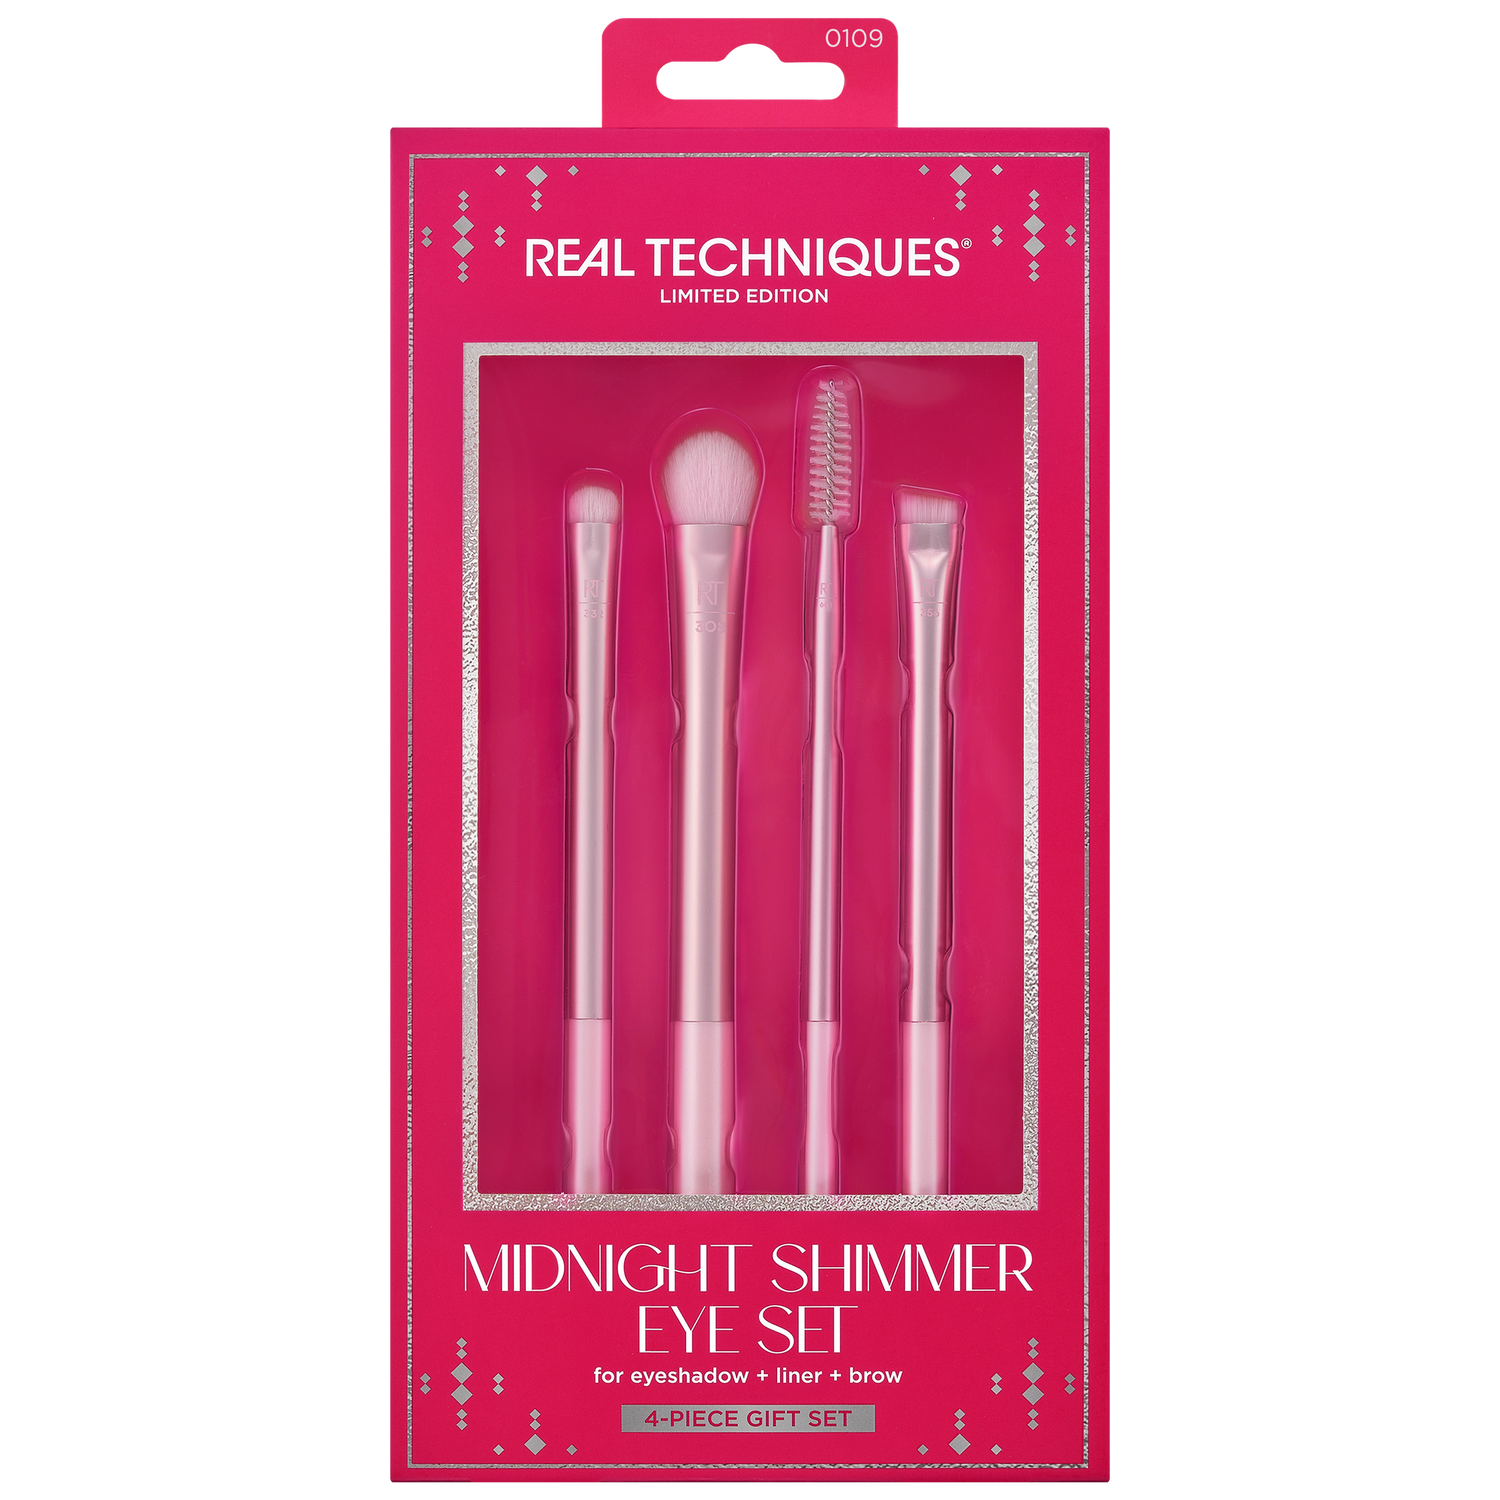 Real Techniques Midnight Shimmer Brush Set